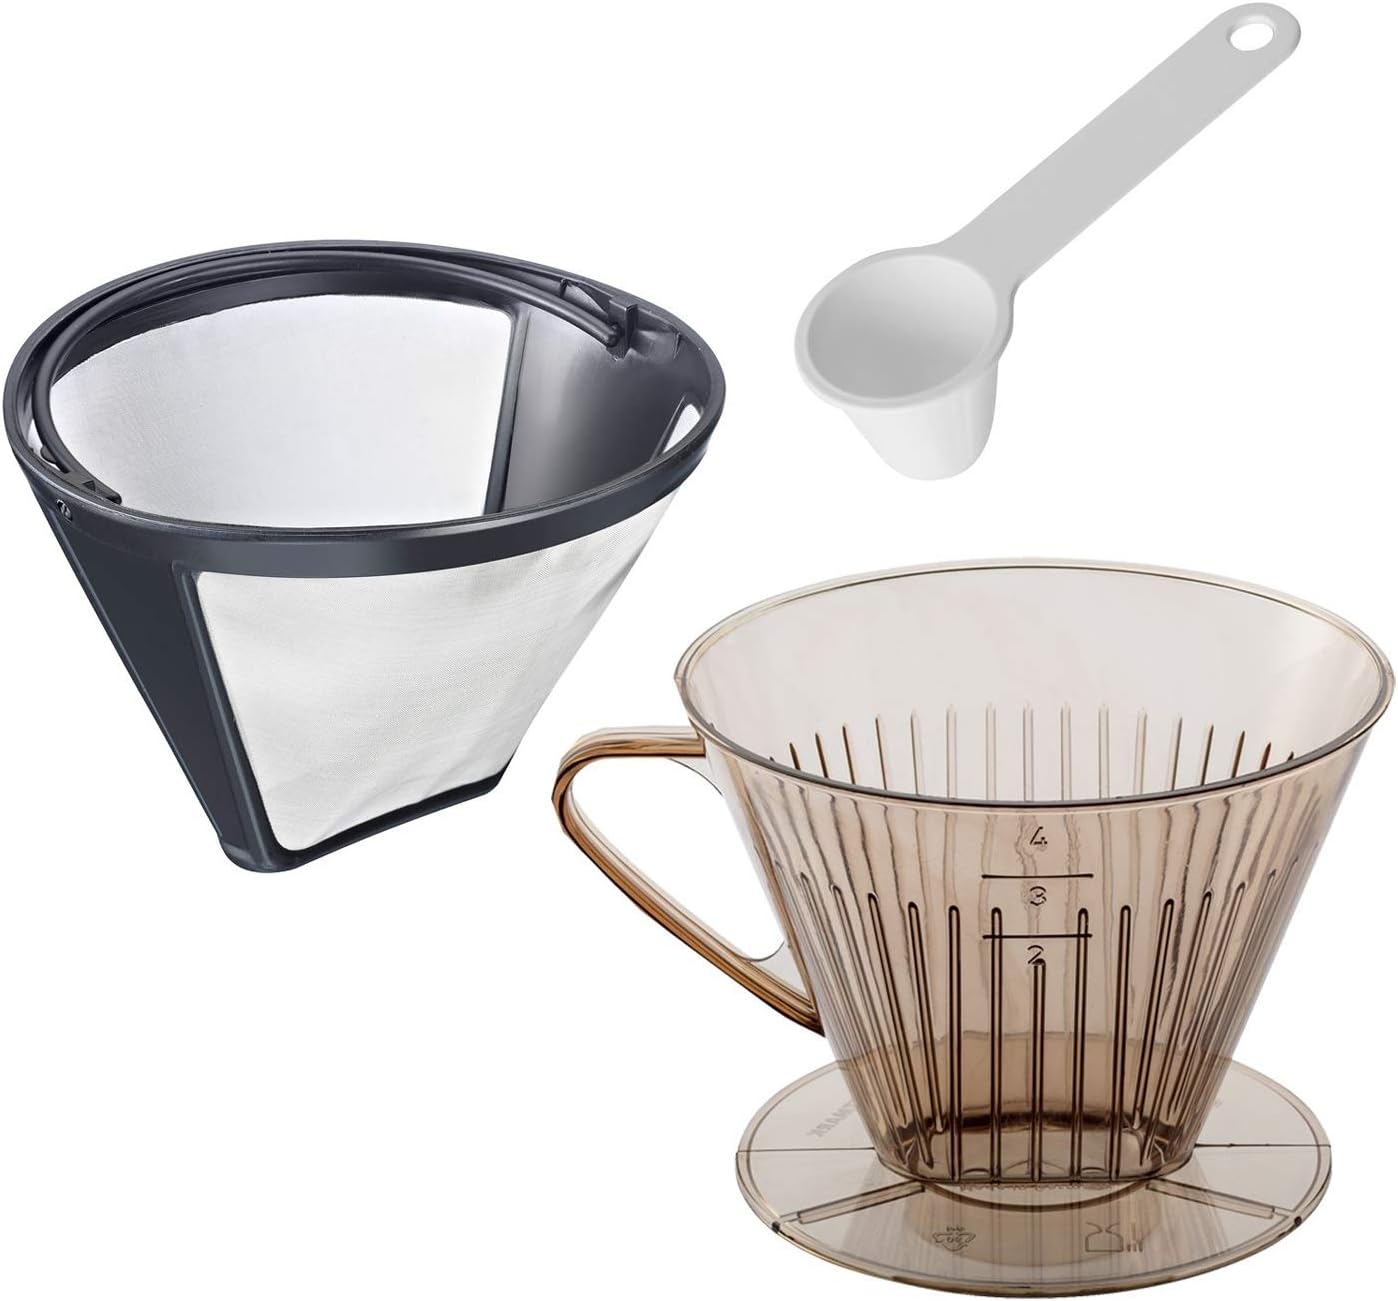 Westmark 244322e8 Coffee Set 3-Piece Permanent Filter Coffee Filter Size 4 + Dosing Spoon Stainless Steel / Plastic Coffee Transparent / White / Silver / Black